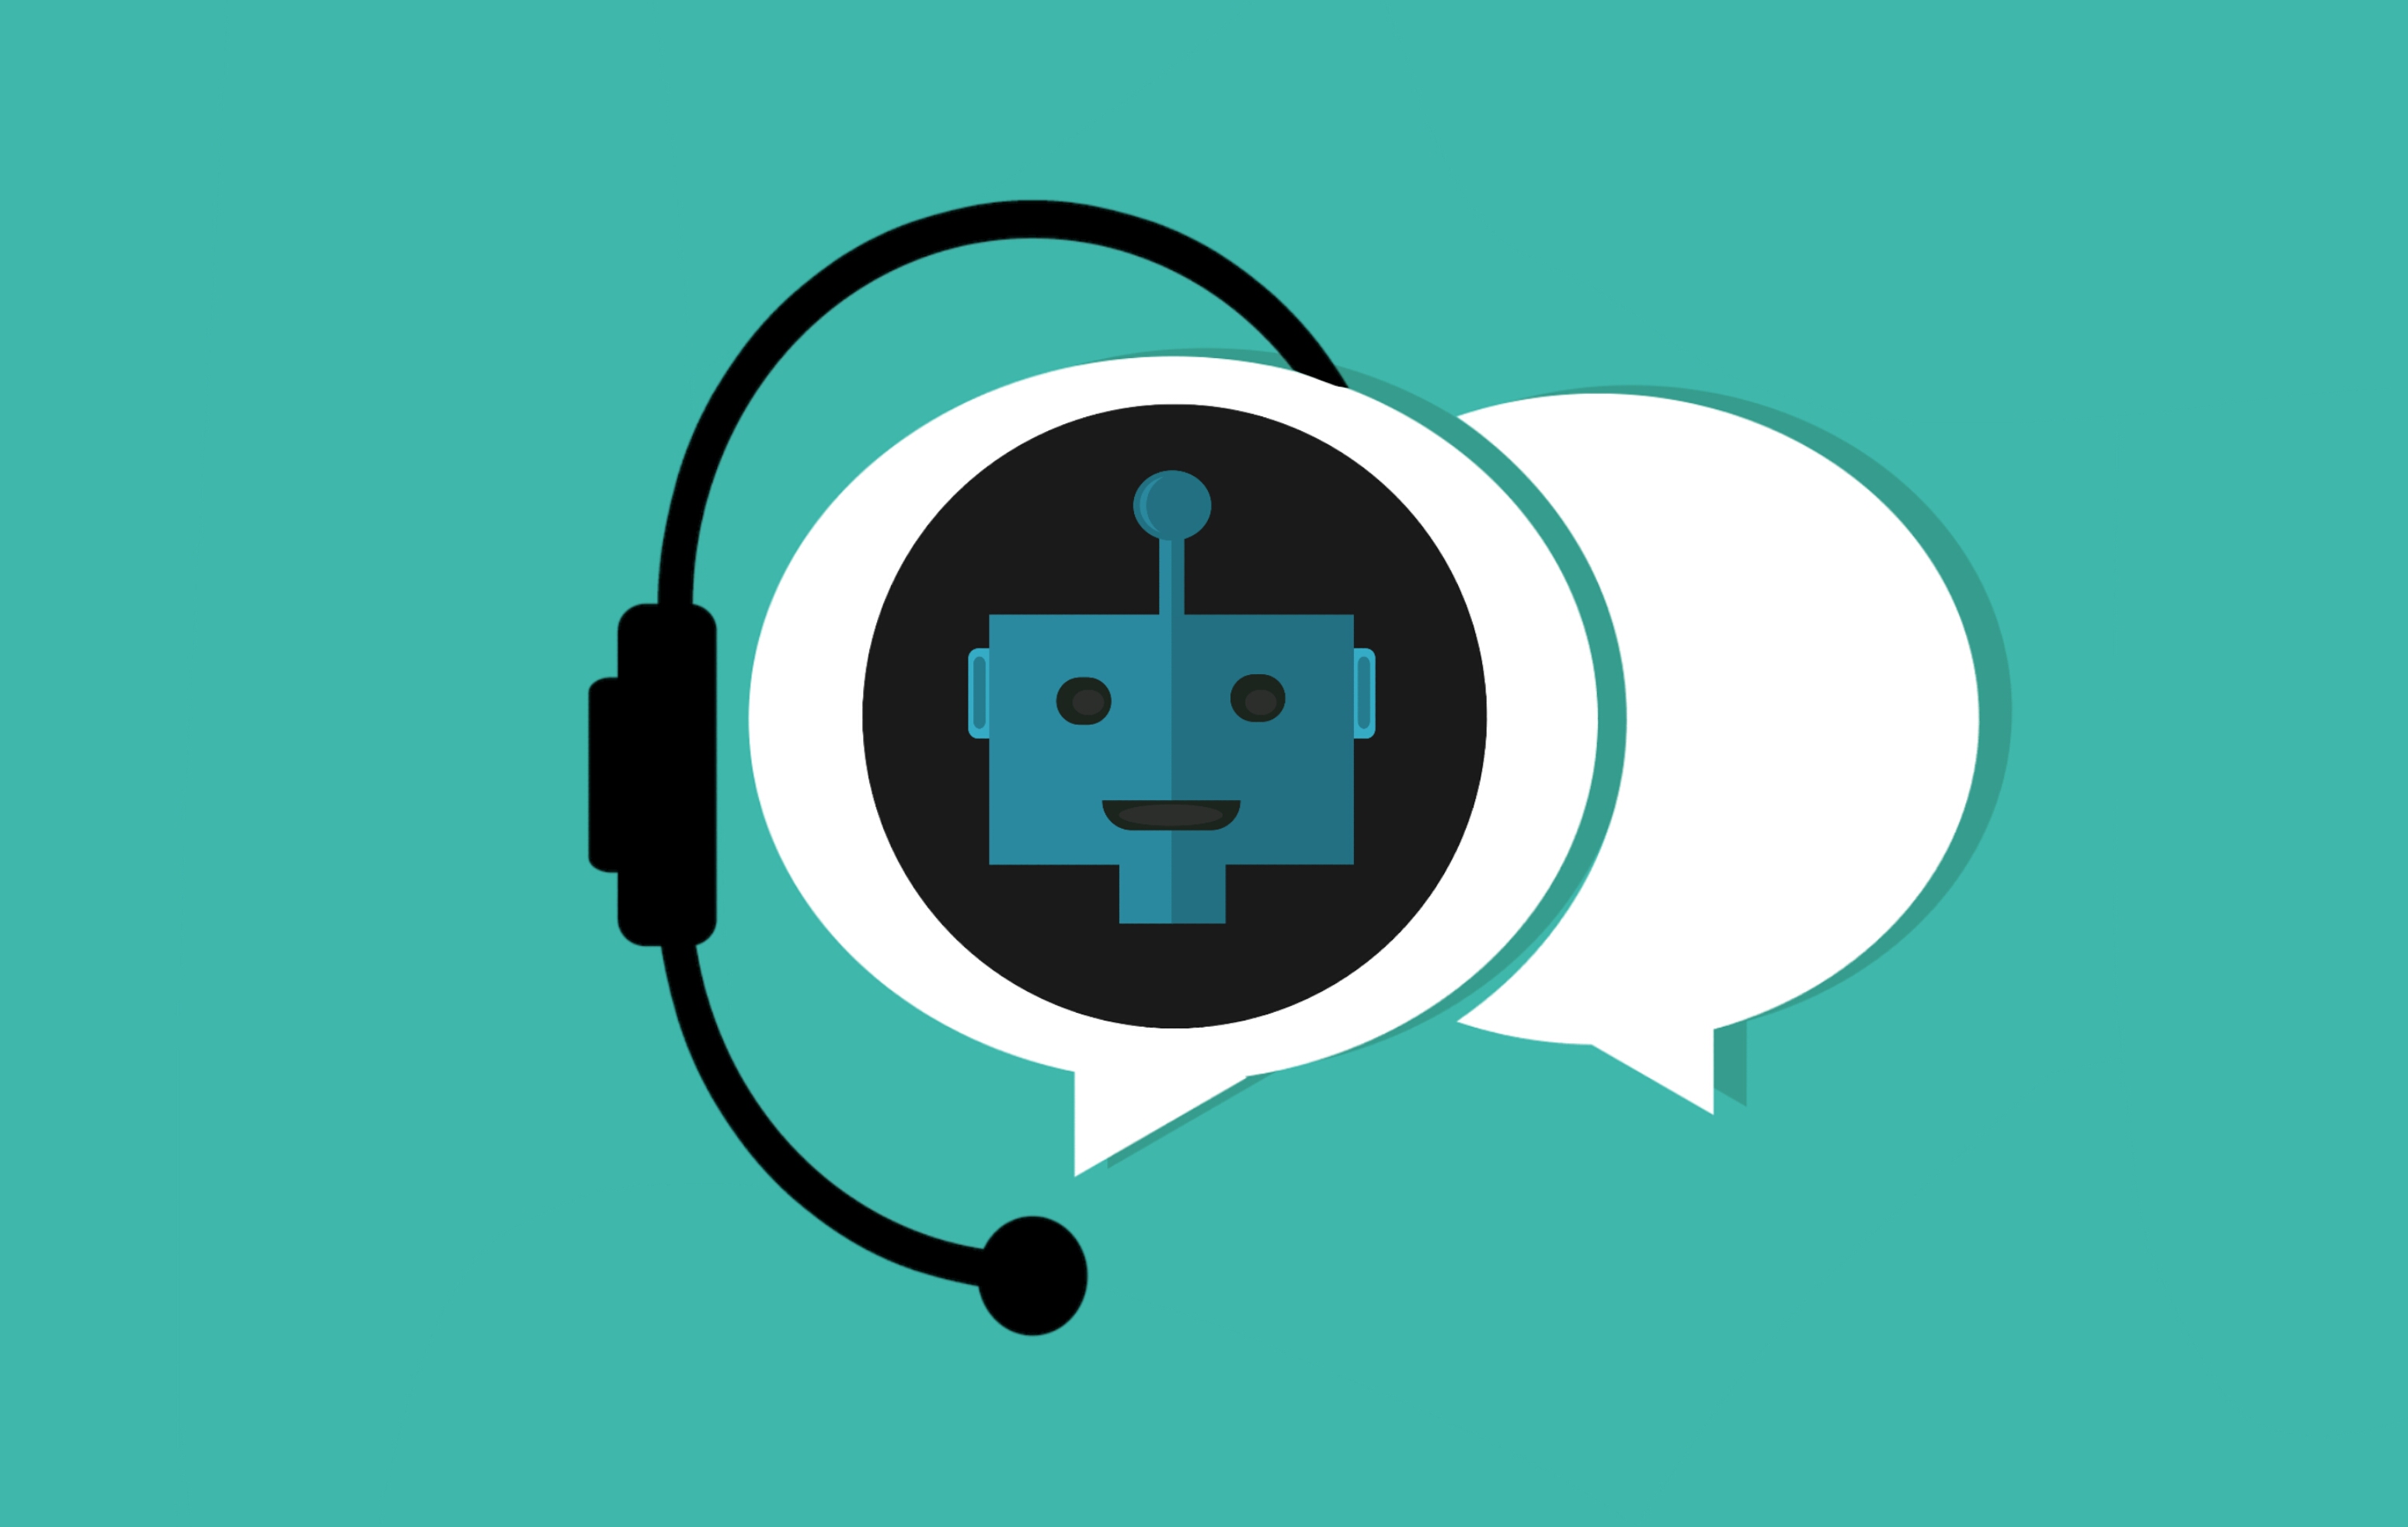 Free Image, chatbot, bot, assistant, support, icon, intelligence, virtual, artificial, robot, chat, service, social, online, bubble, talk, network, dialog, program, interactive, message, user, app, chatter, speech, Chatterbot, green, turquoise, aqua